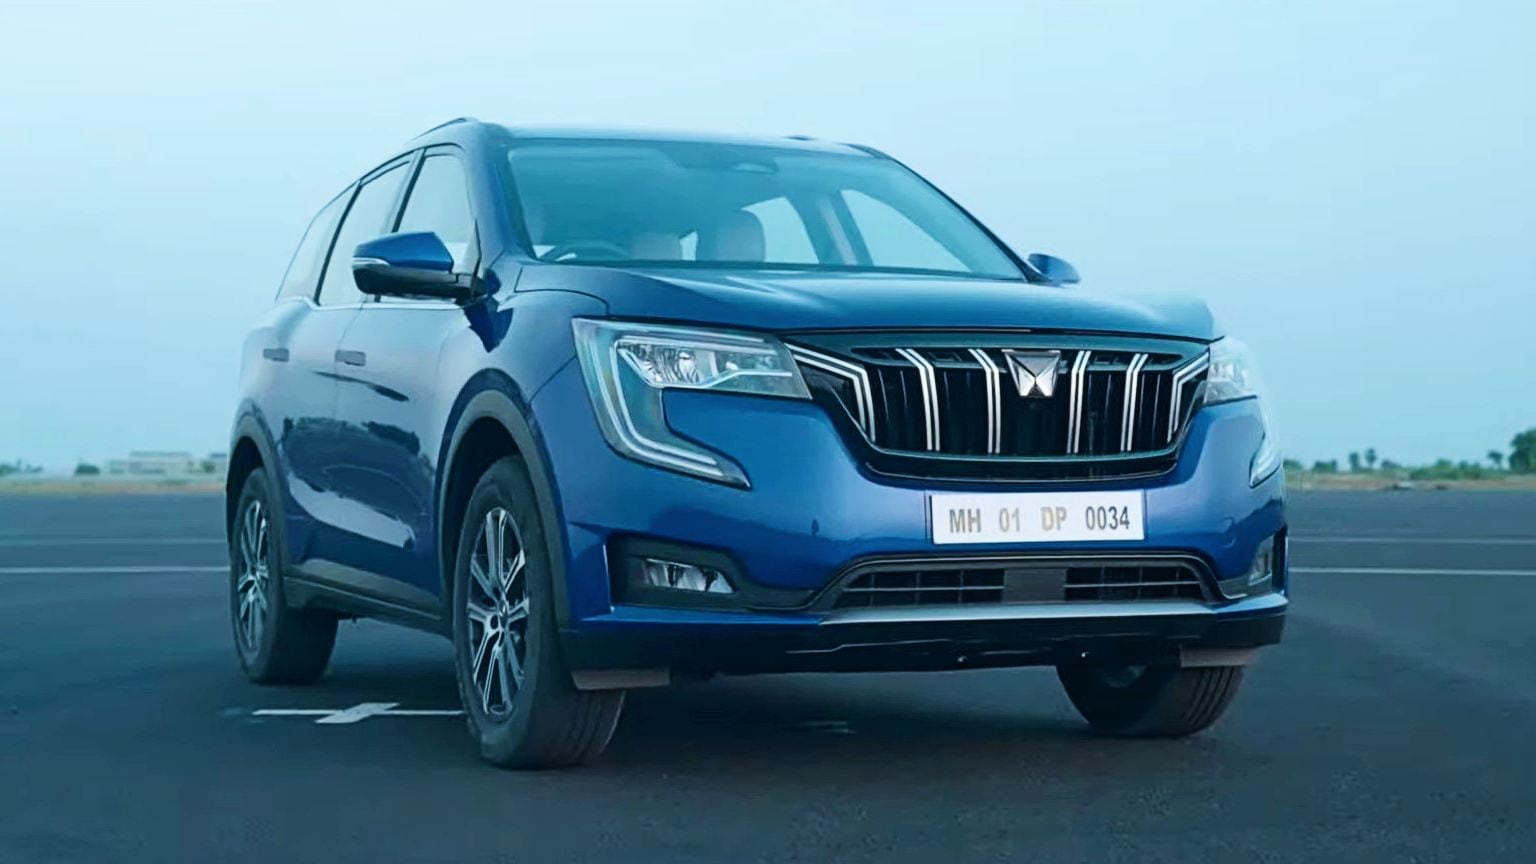 The Mahindra XUV700 will be available with a 2.0-litre petrol and a 2.2-litre diesel engine. Image: Mahindra